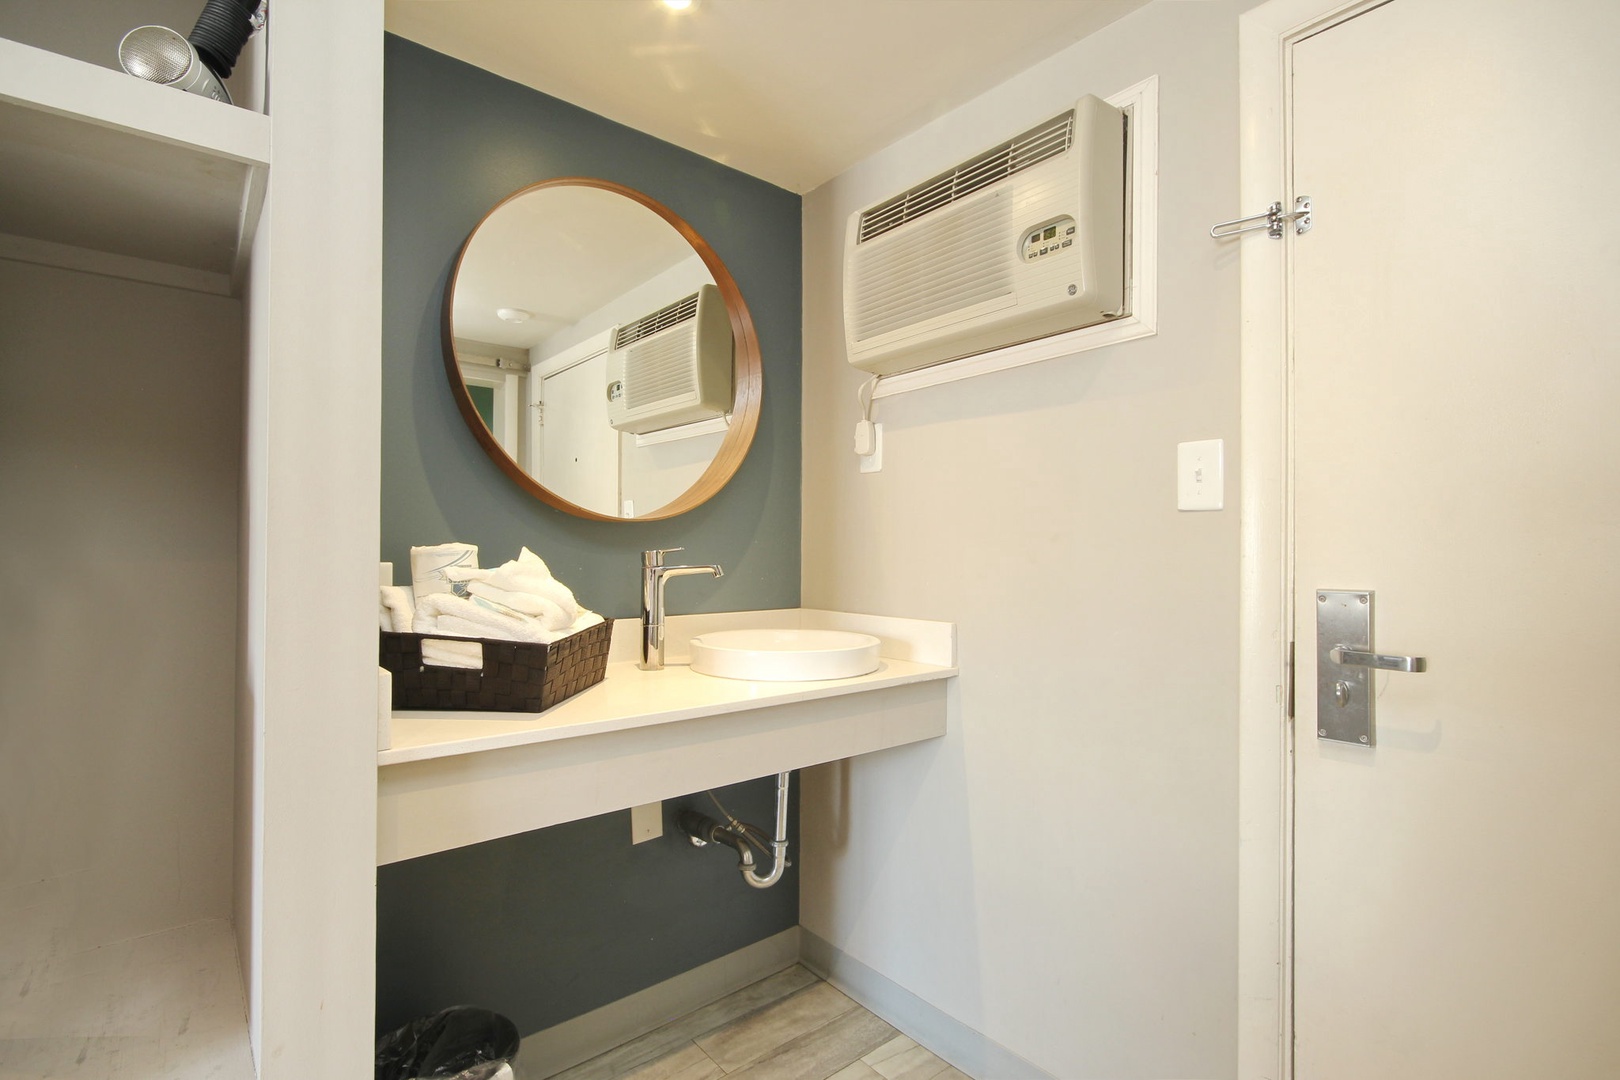 Clean and functional bathroom for your stay